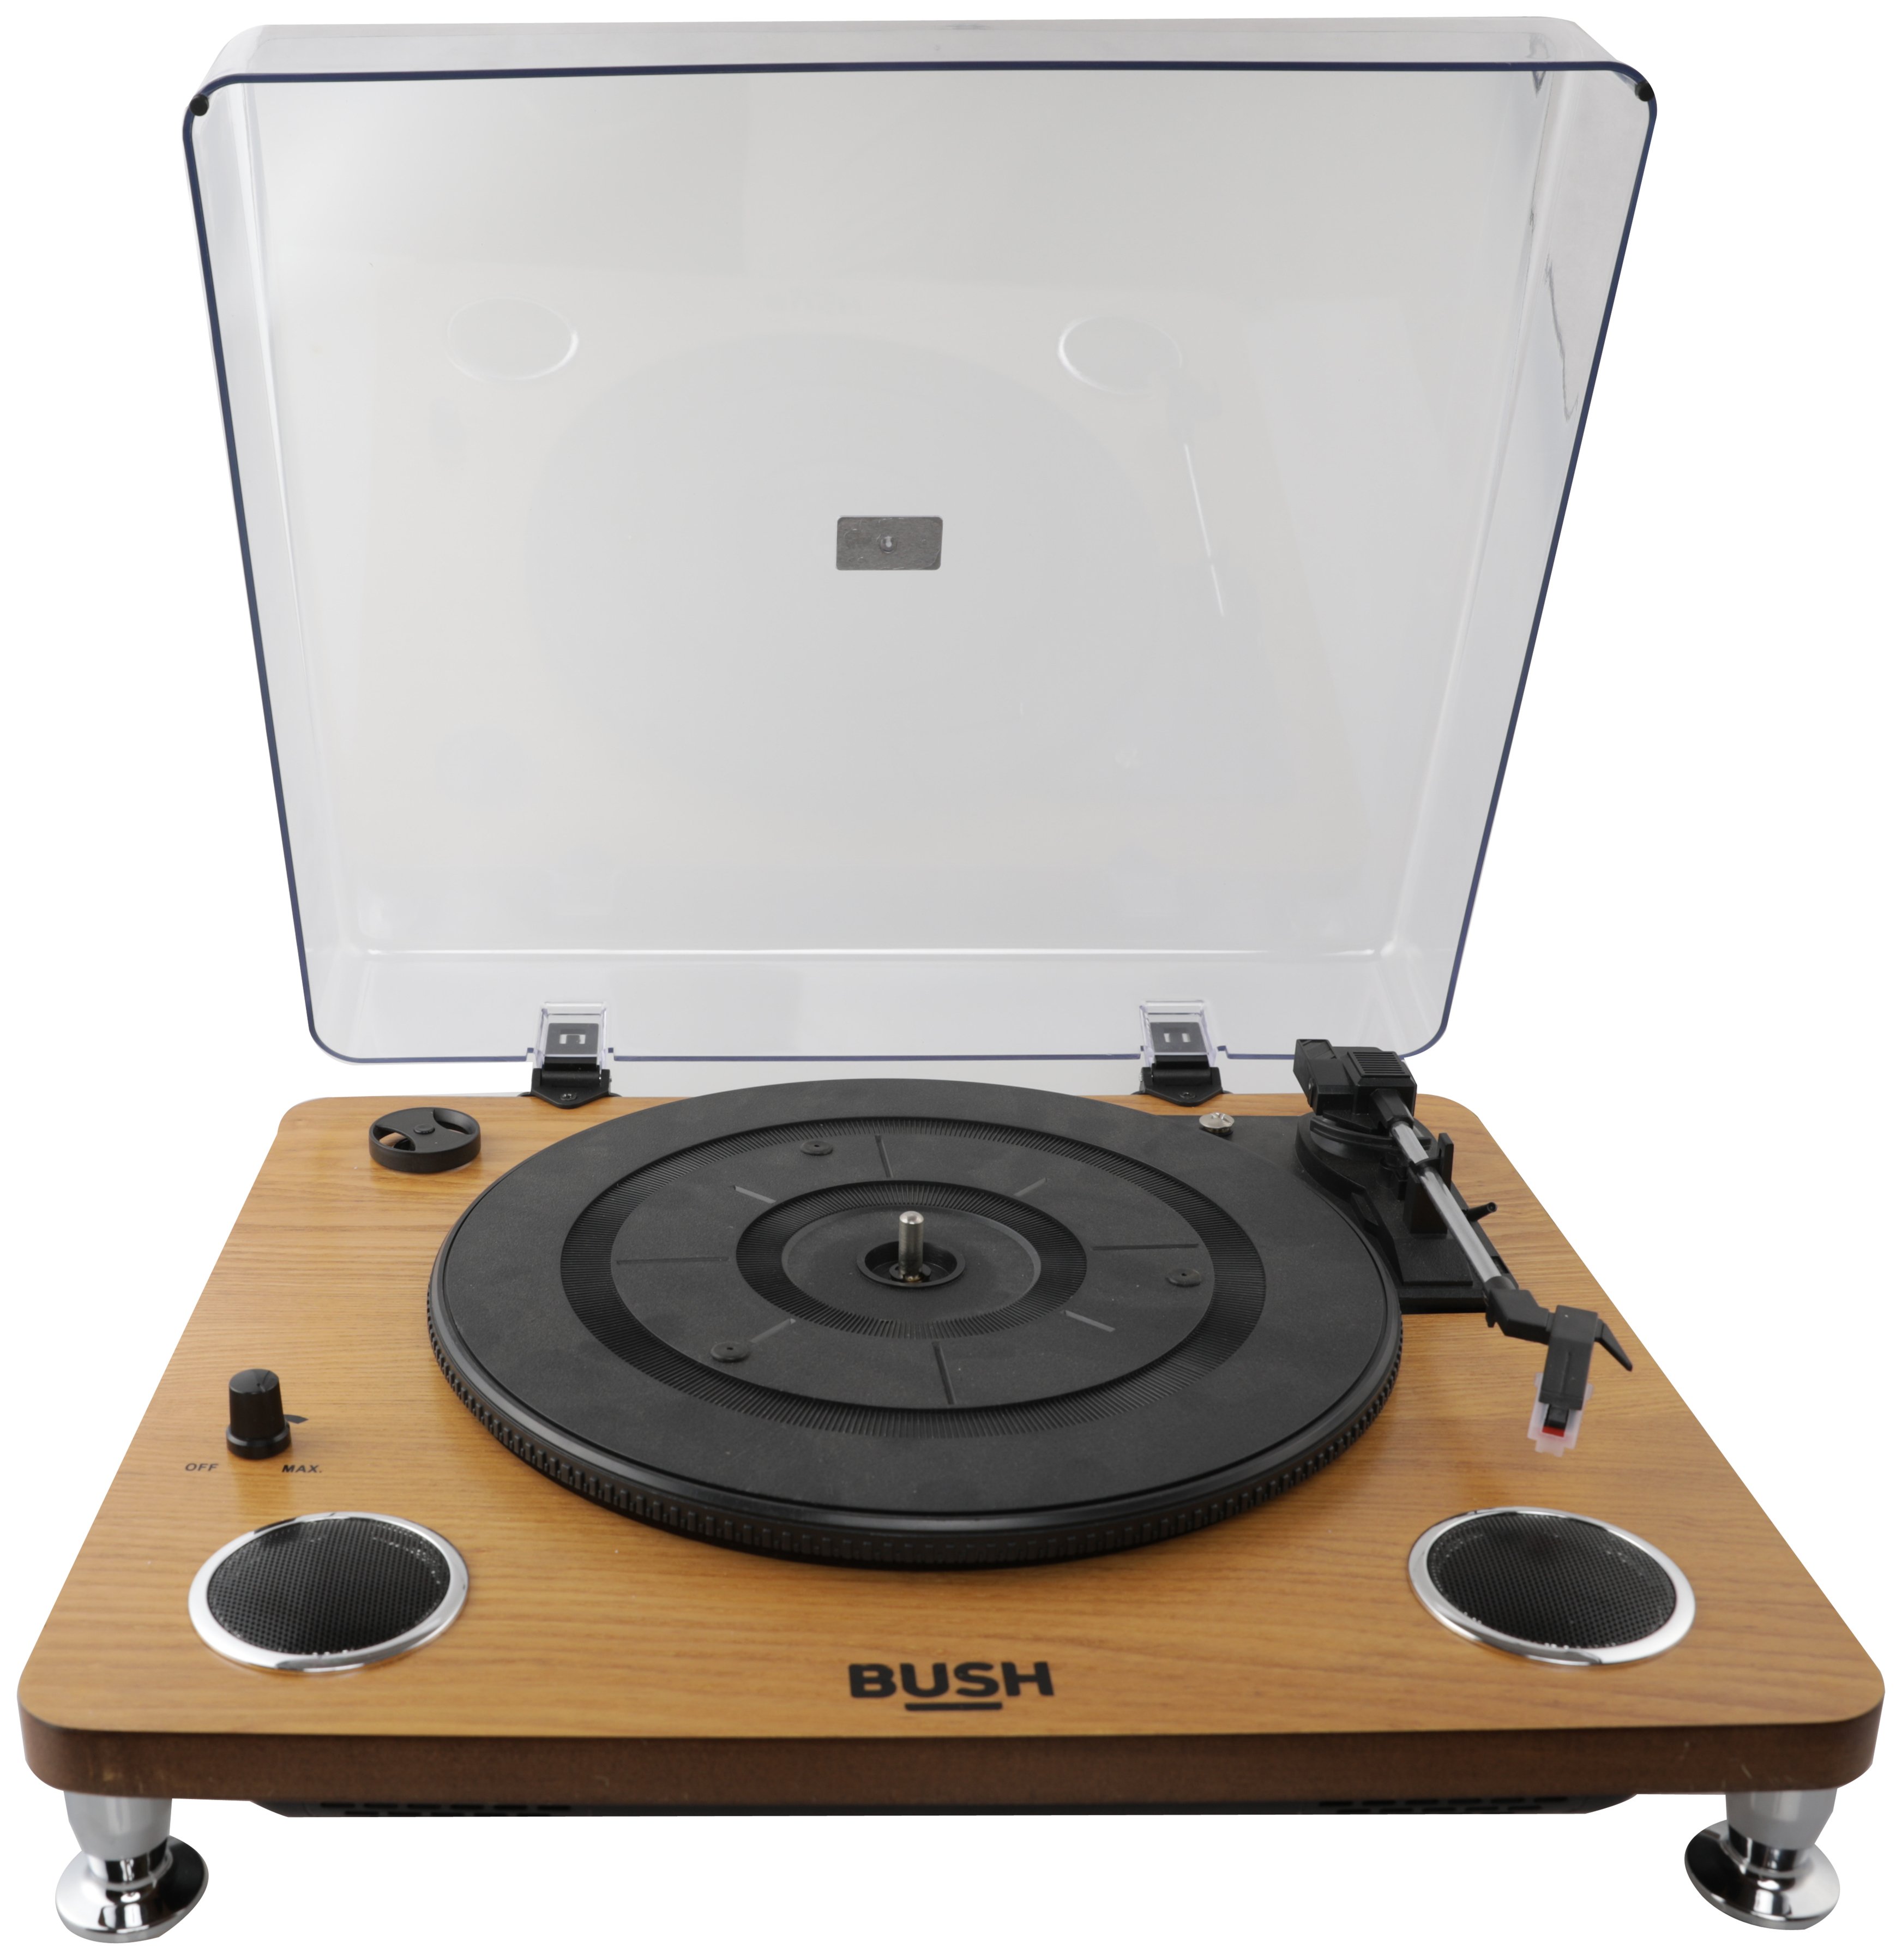 Bush Pro Turntable with Speakers.